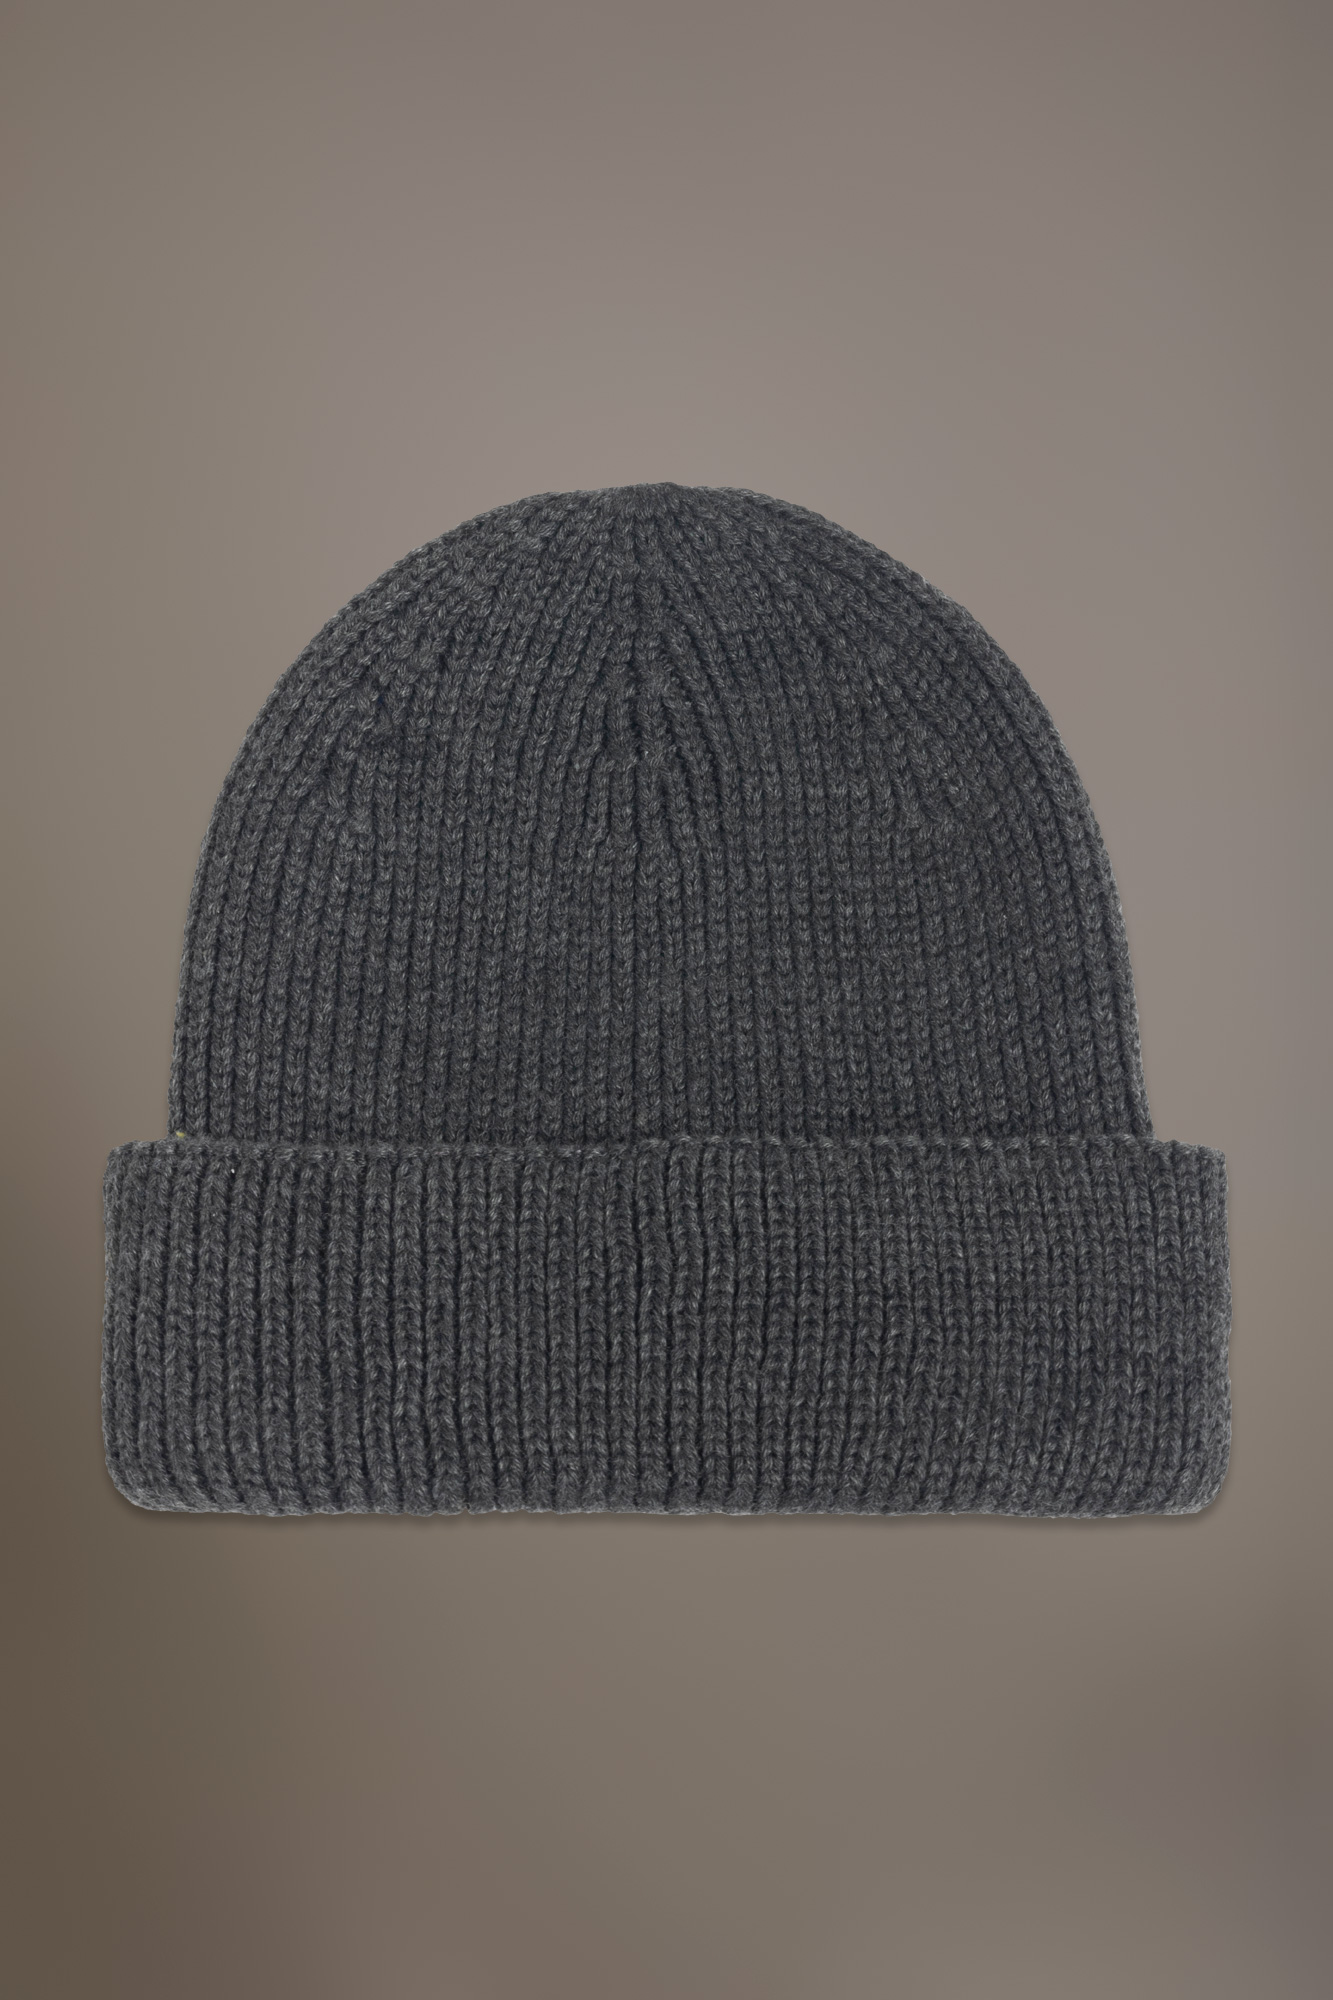 Ribbed knit beanie hat